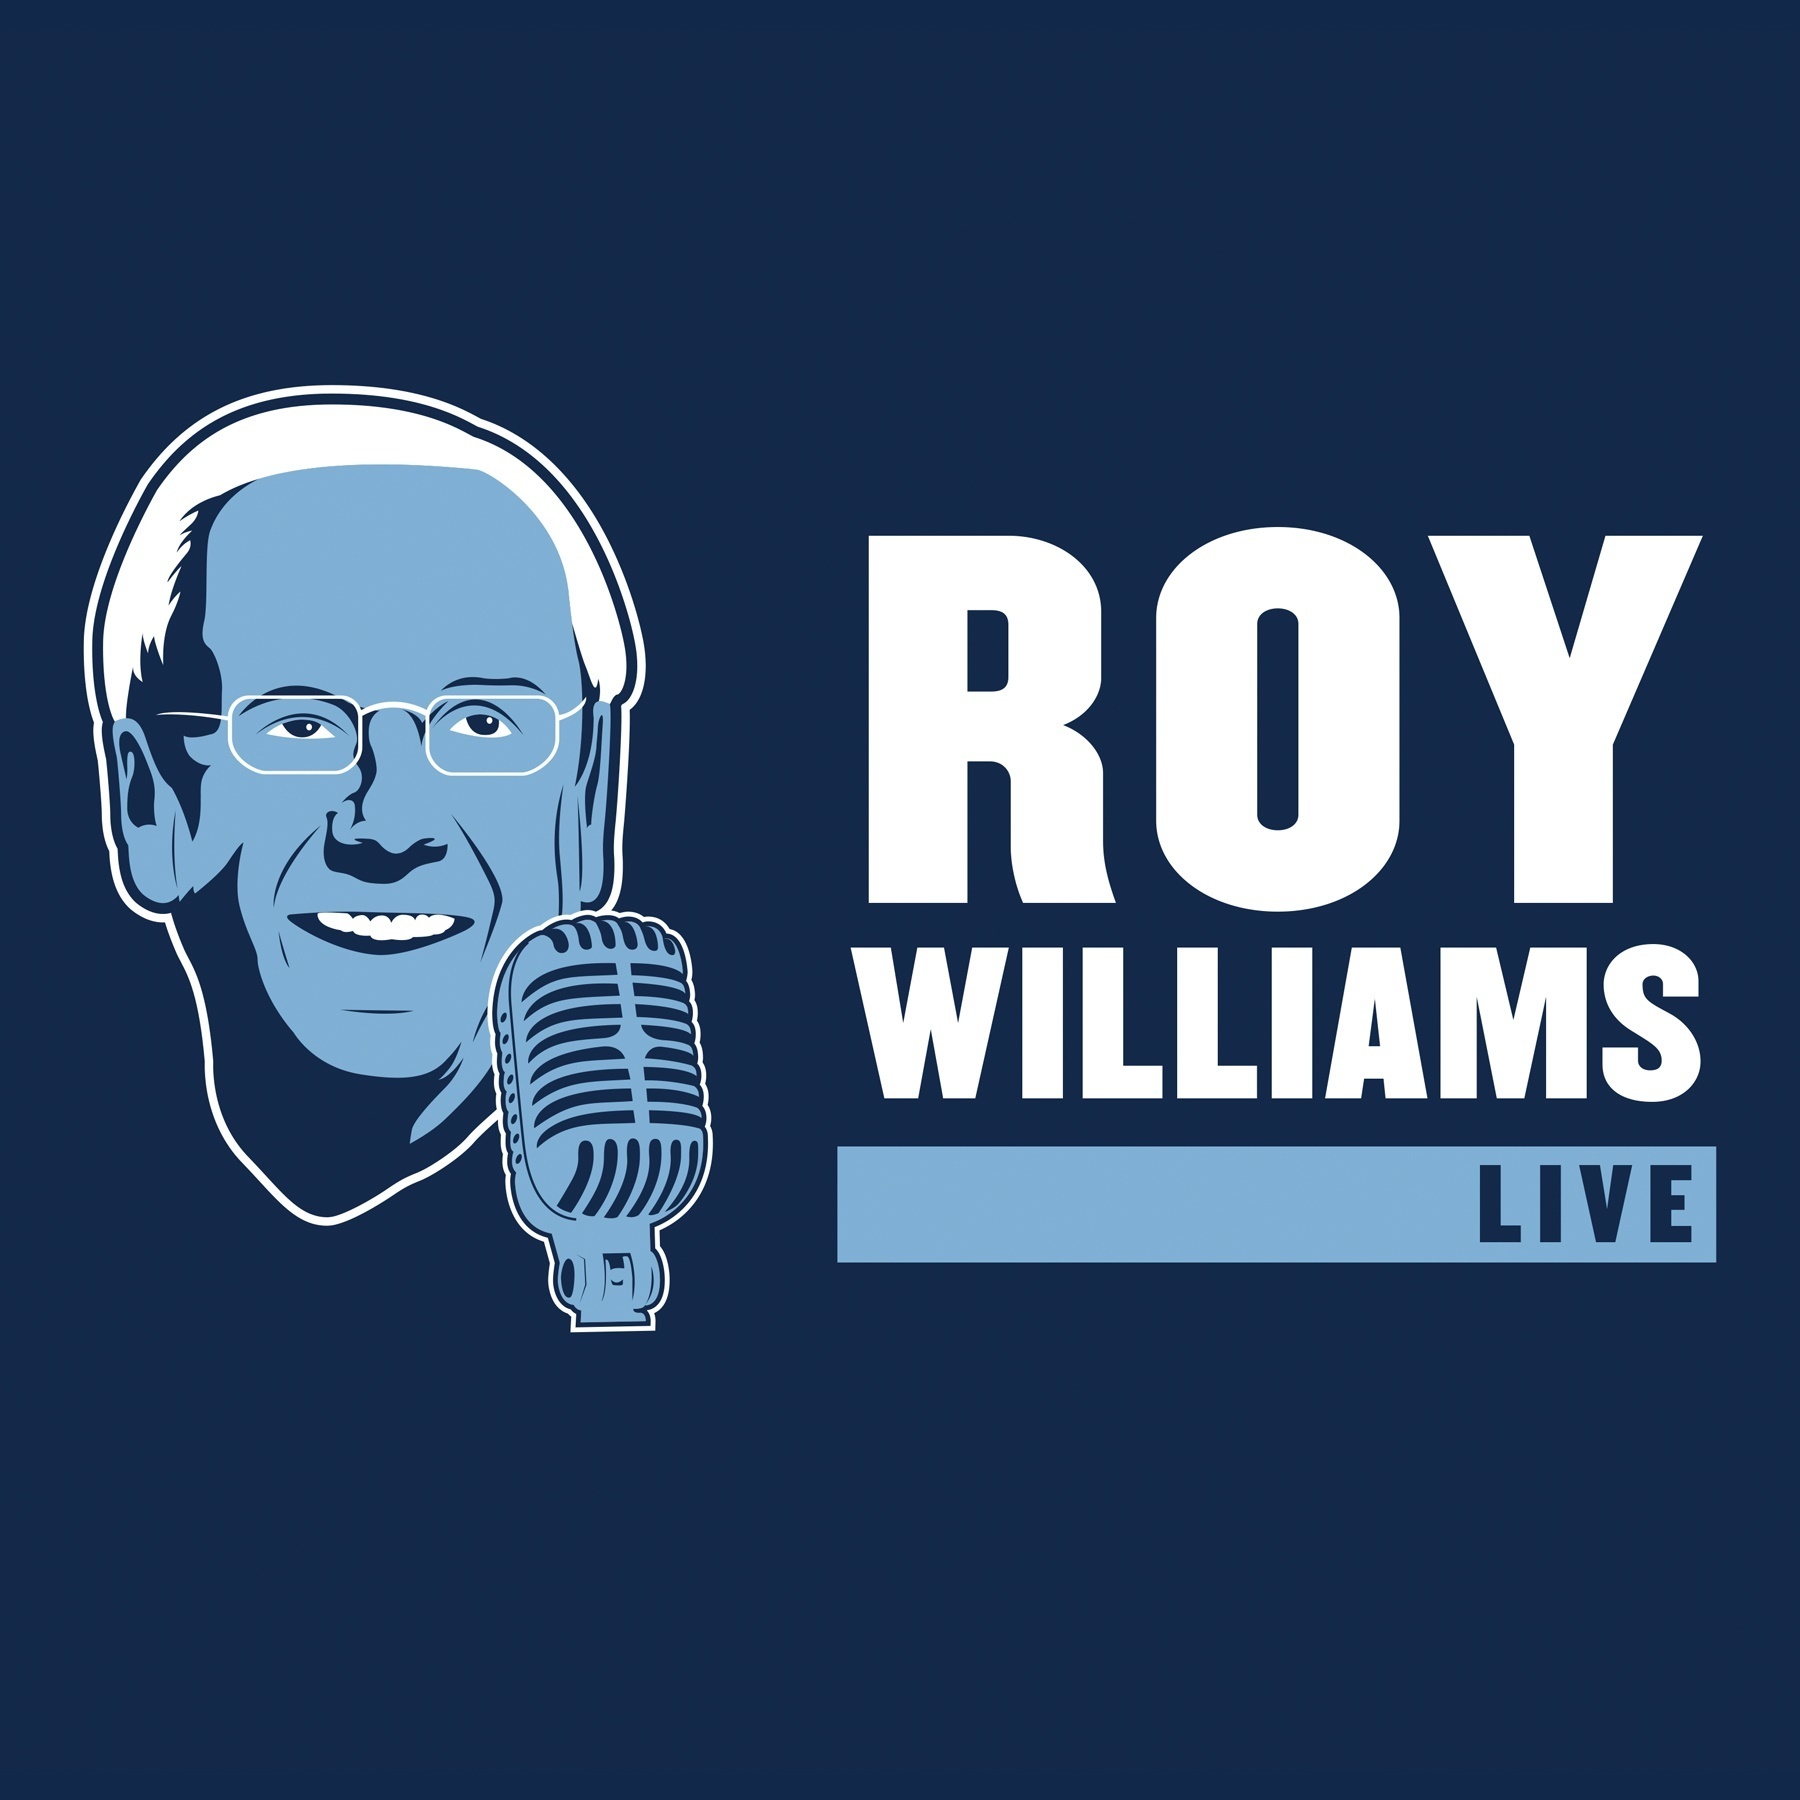 Roy Williams Live from 11-13-17